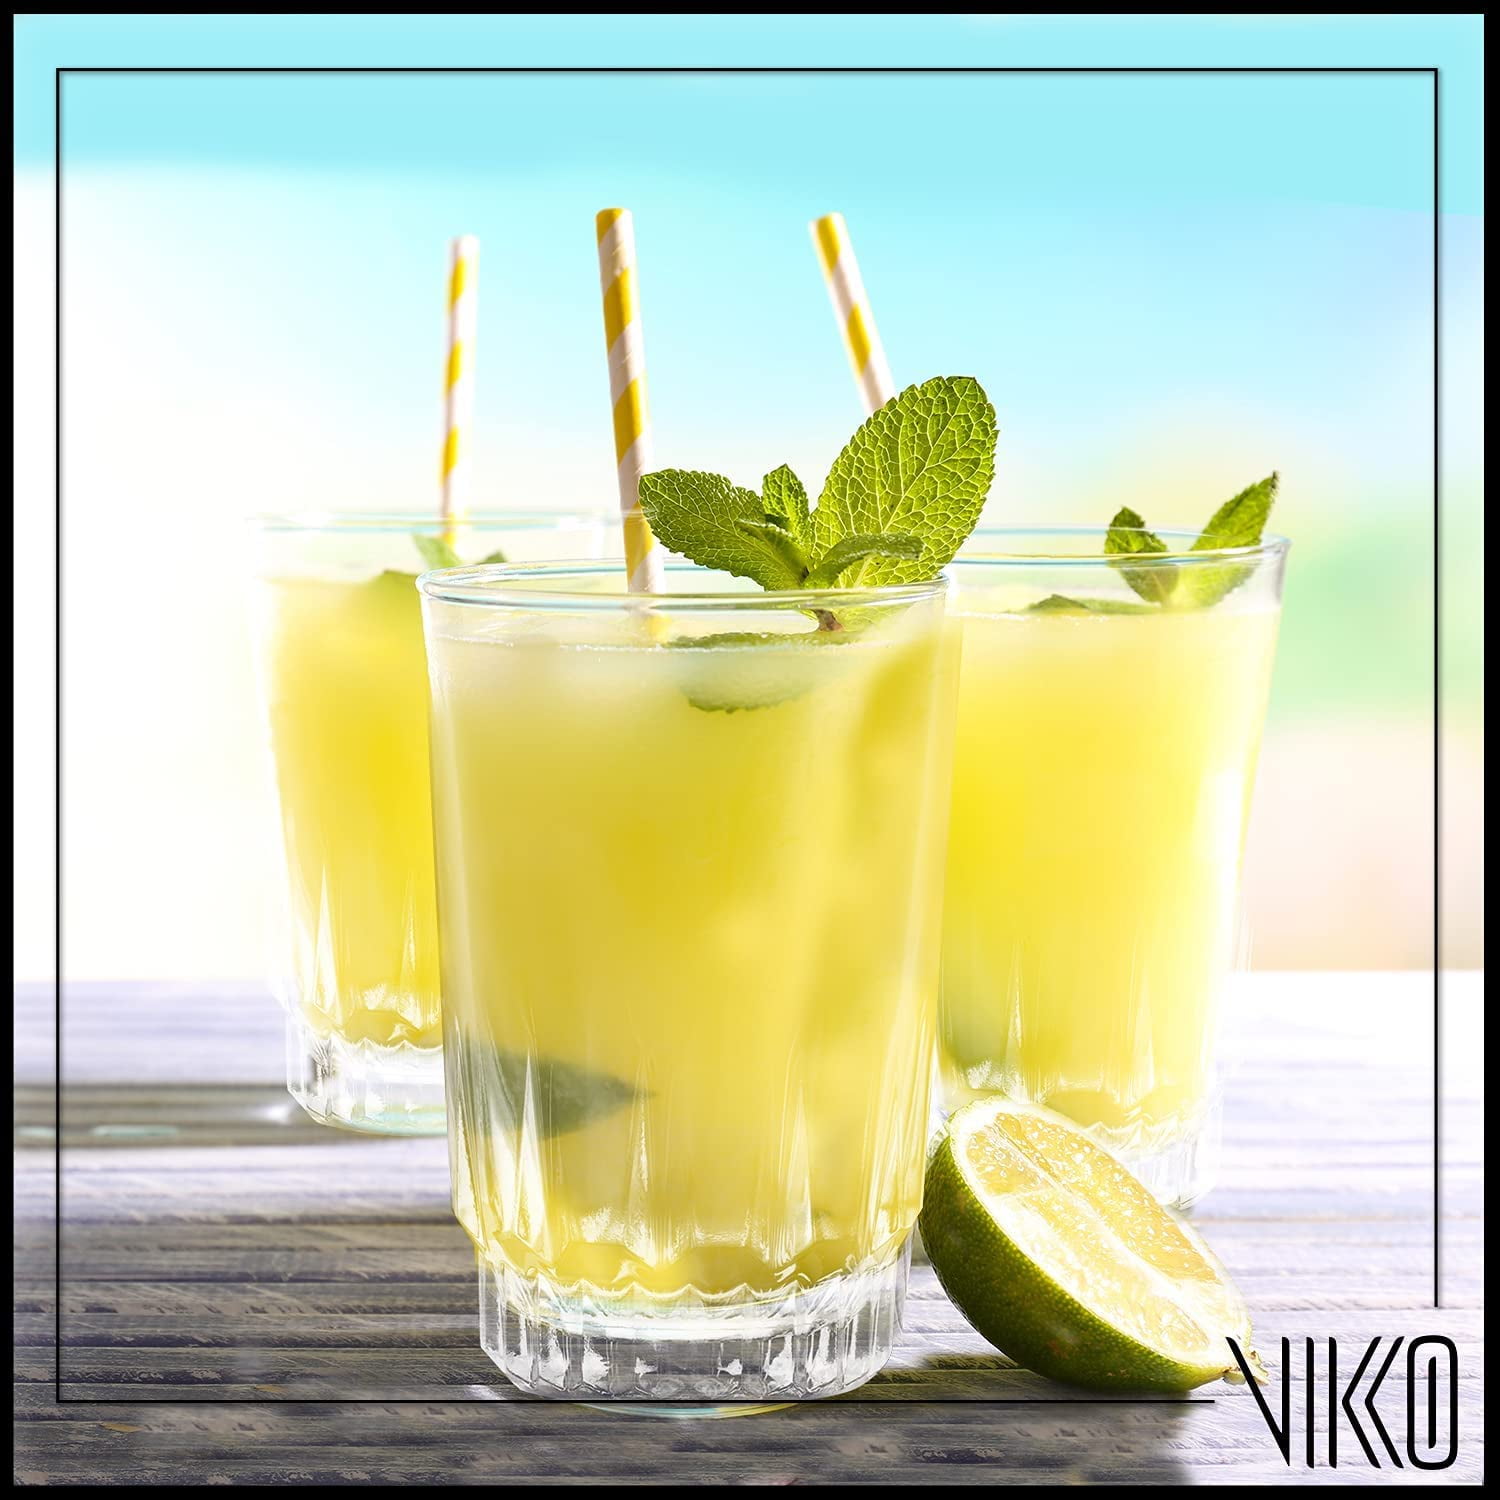 Vikko Juice Glasses, 7 Ounce Cups for Drinking Orange Juice, Water, Kids  Glass Drinking Glasses for …See more Vikko Juice Glasses, 7 Ounce Cups for